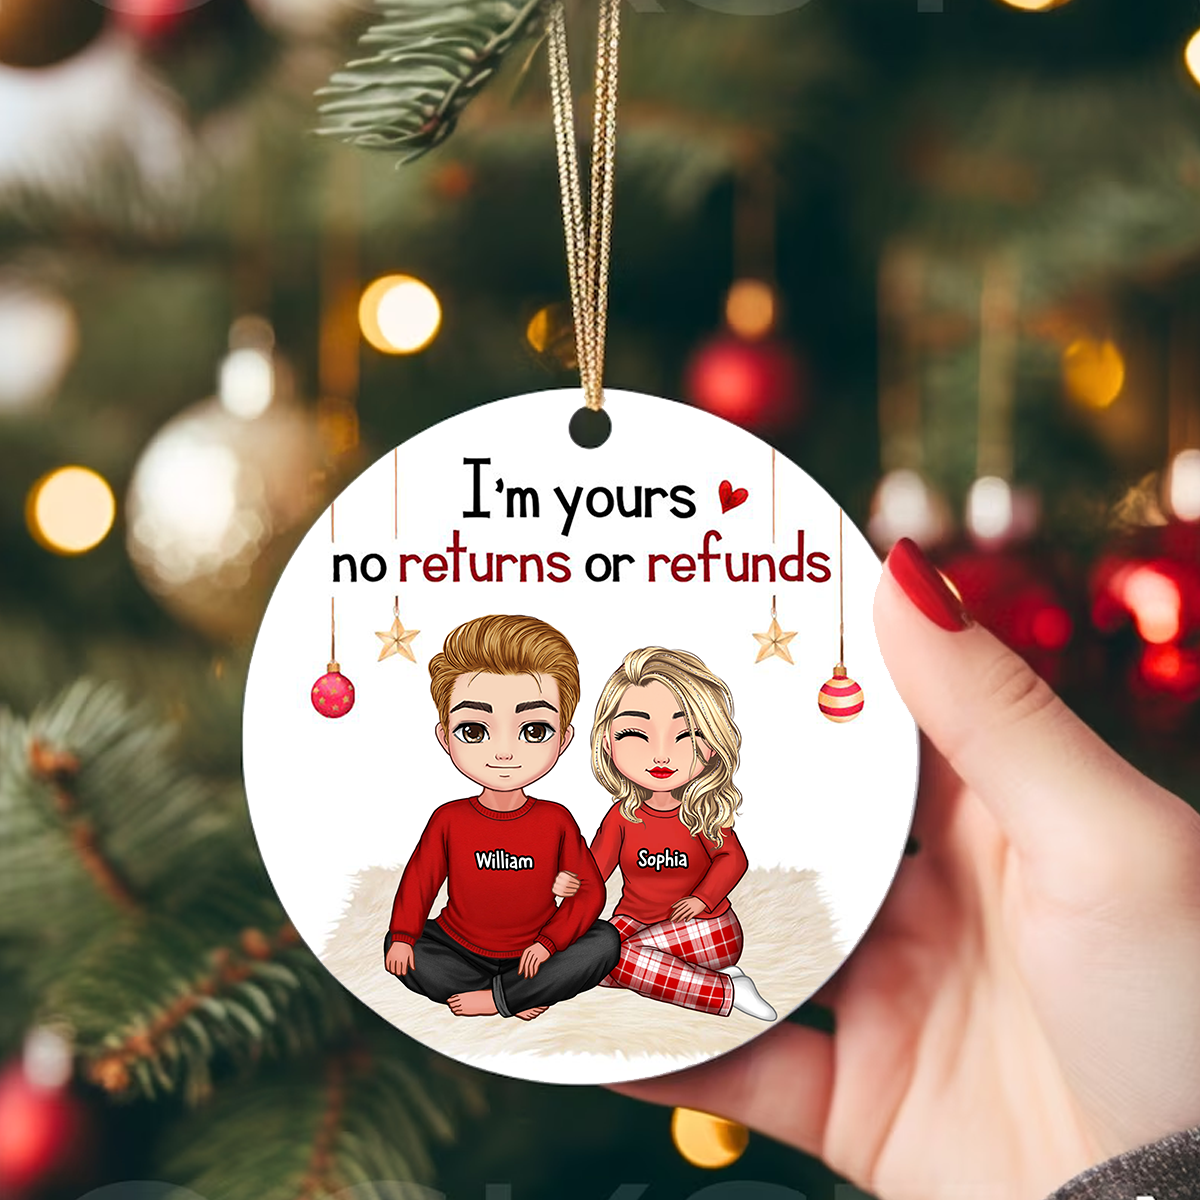 You And Me We Got This, Custom Appearances And Names- Personalized Ceramic Ornament - Gift For Christmas, Gift For Couple